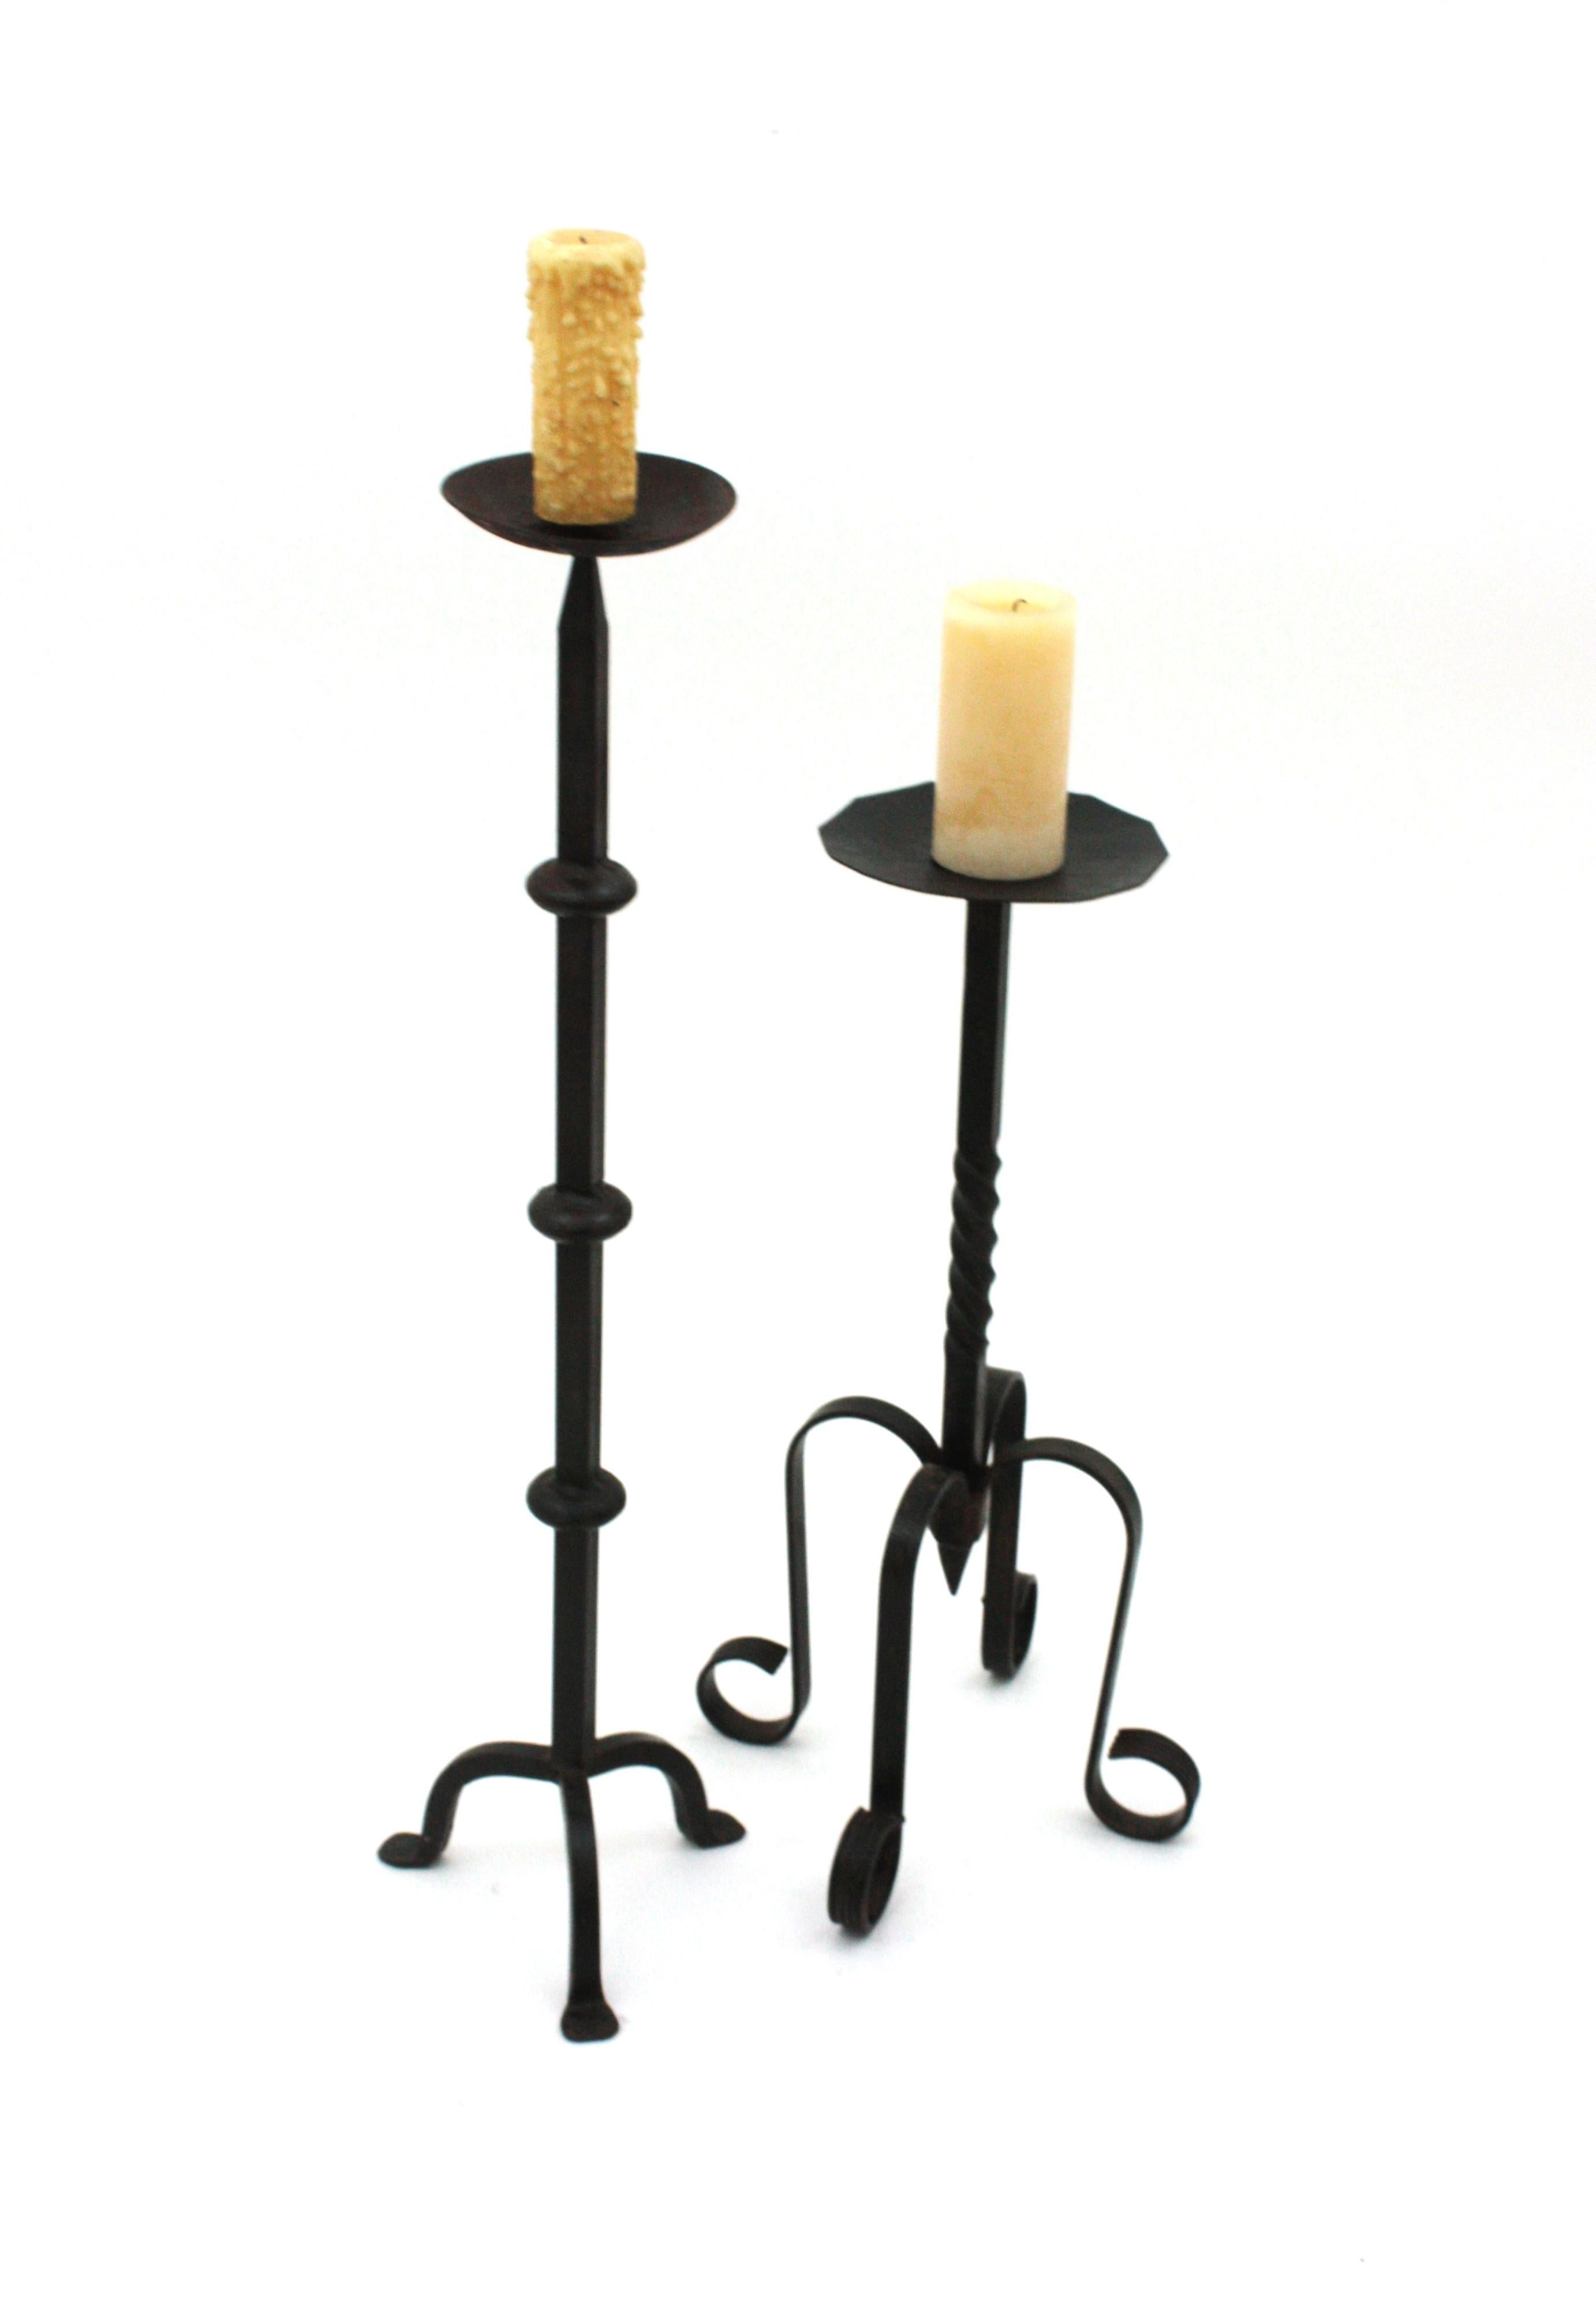 Spanish Medieval Hand Forged Iron Candle Stand / Floor Candle Holder For Sale 6